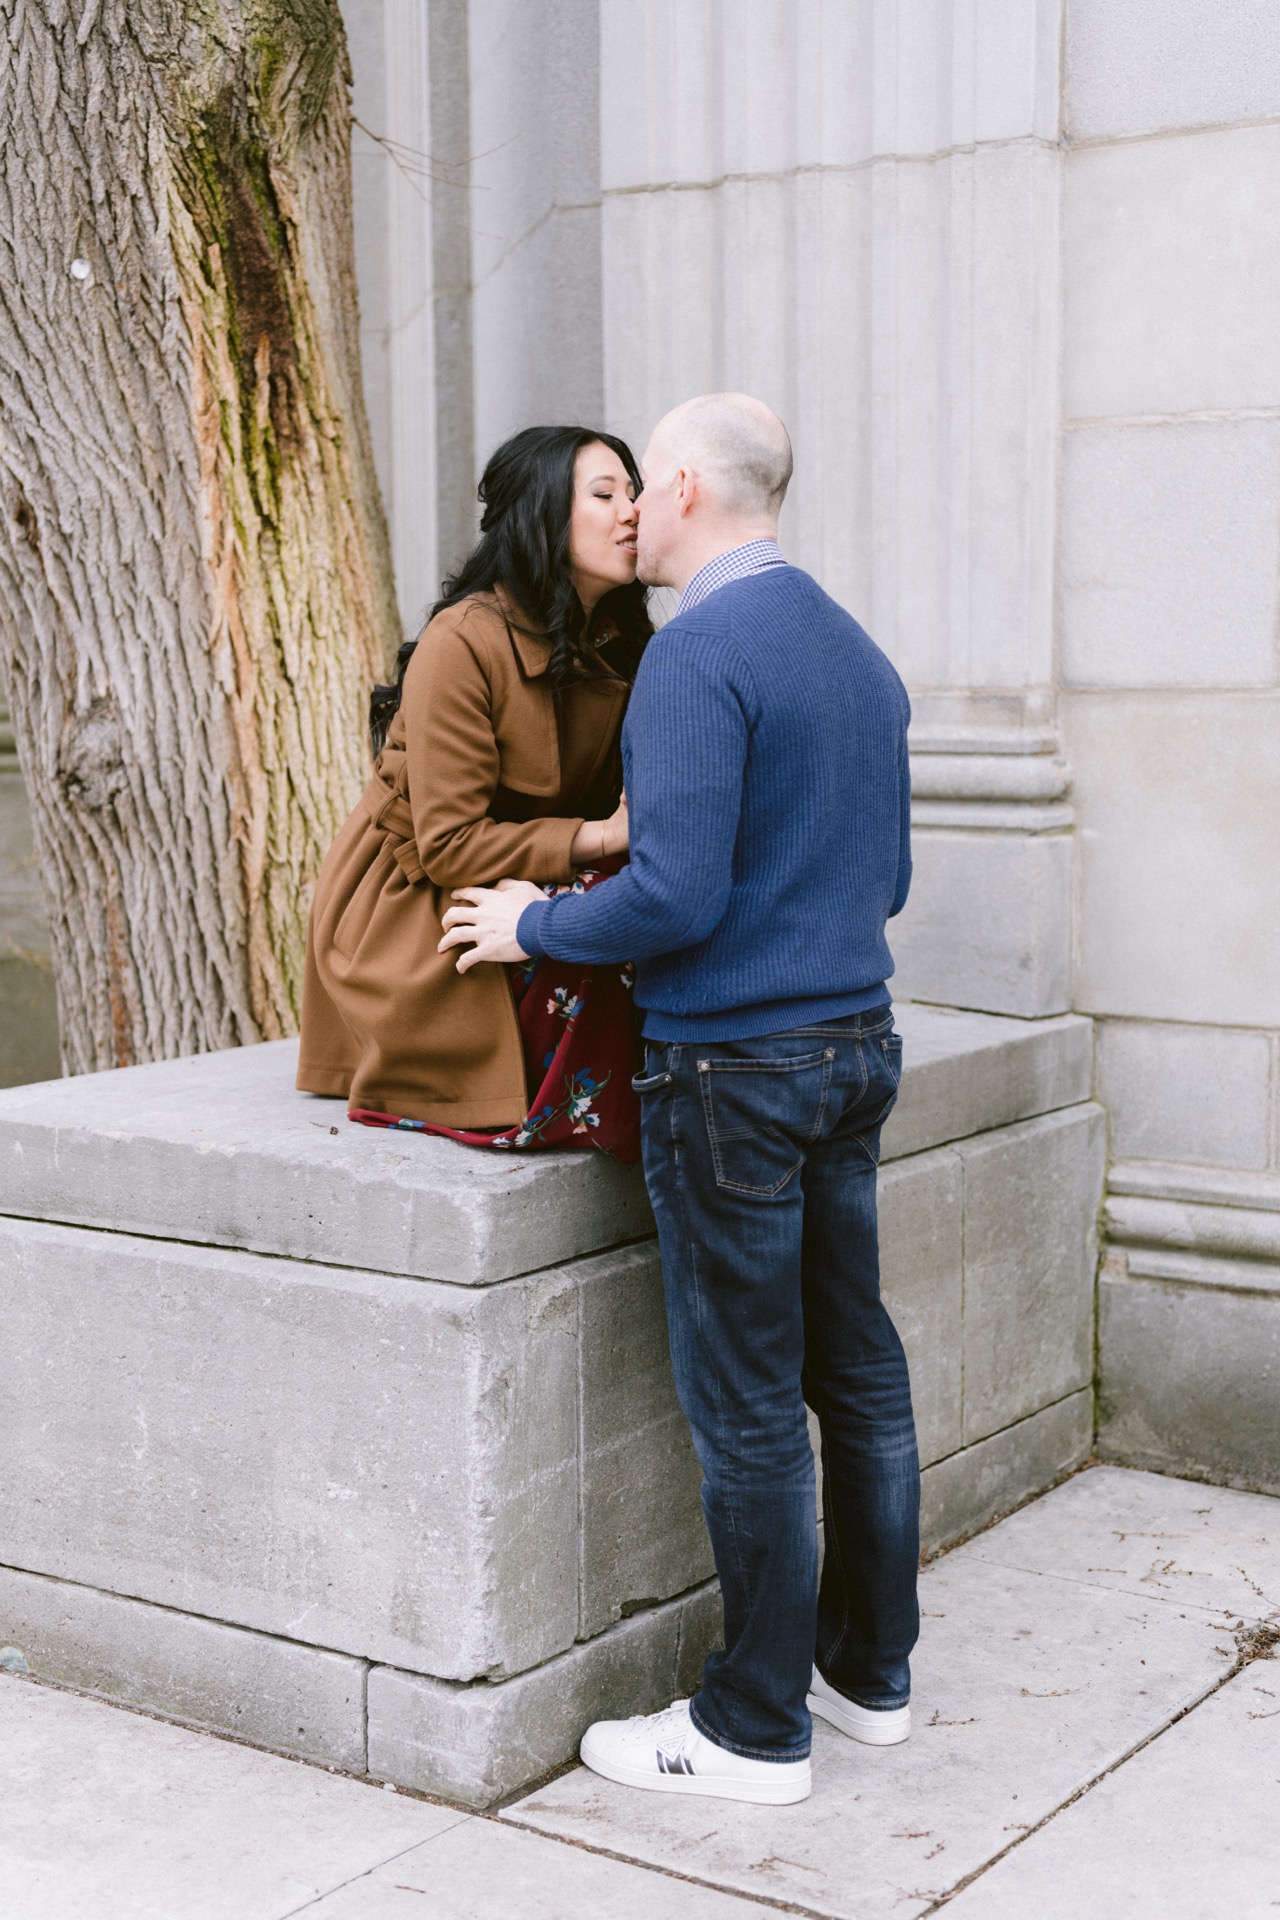 A couple sharing a romantic moment by a stone structure outdoors.